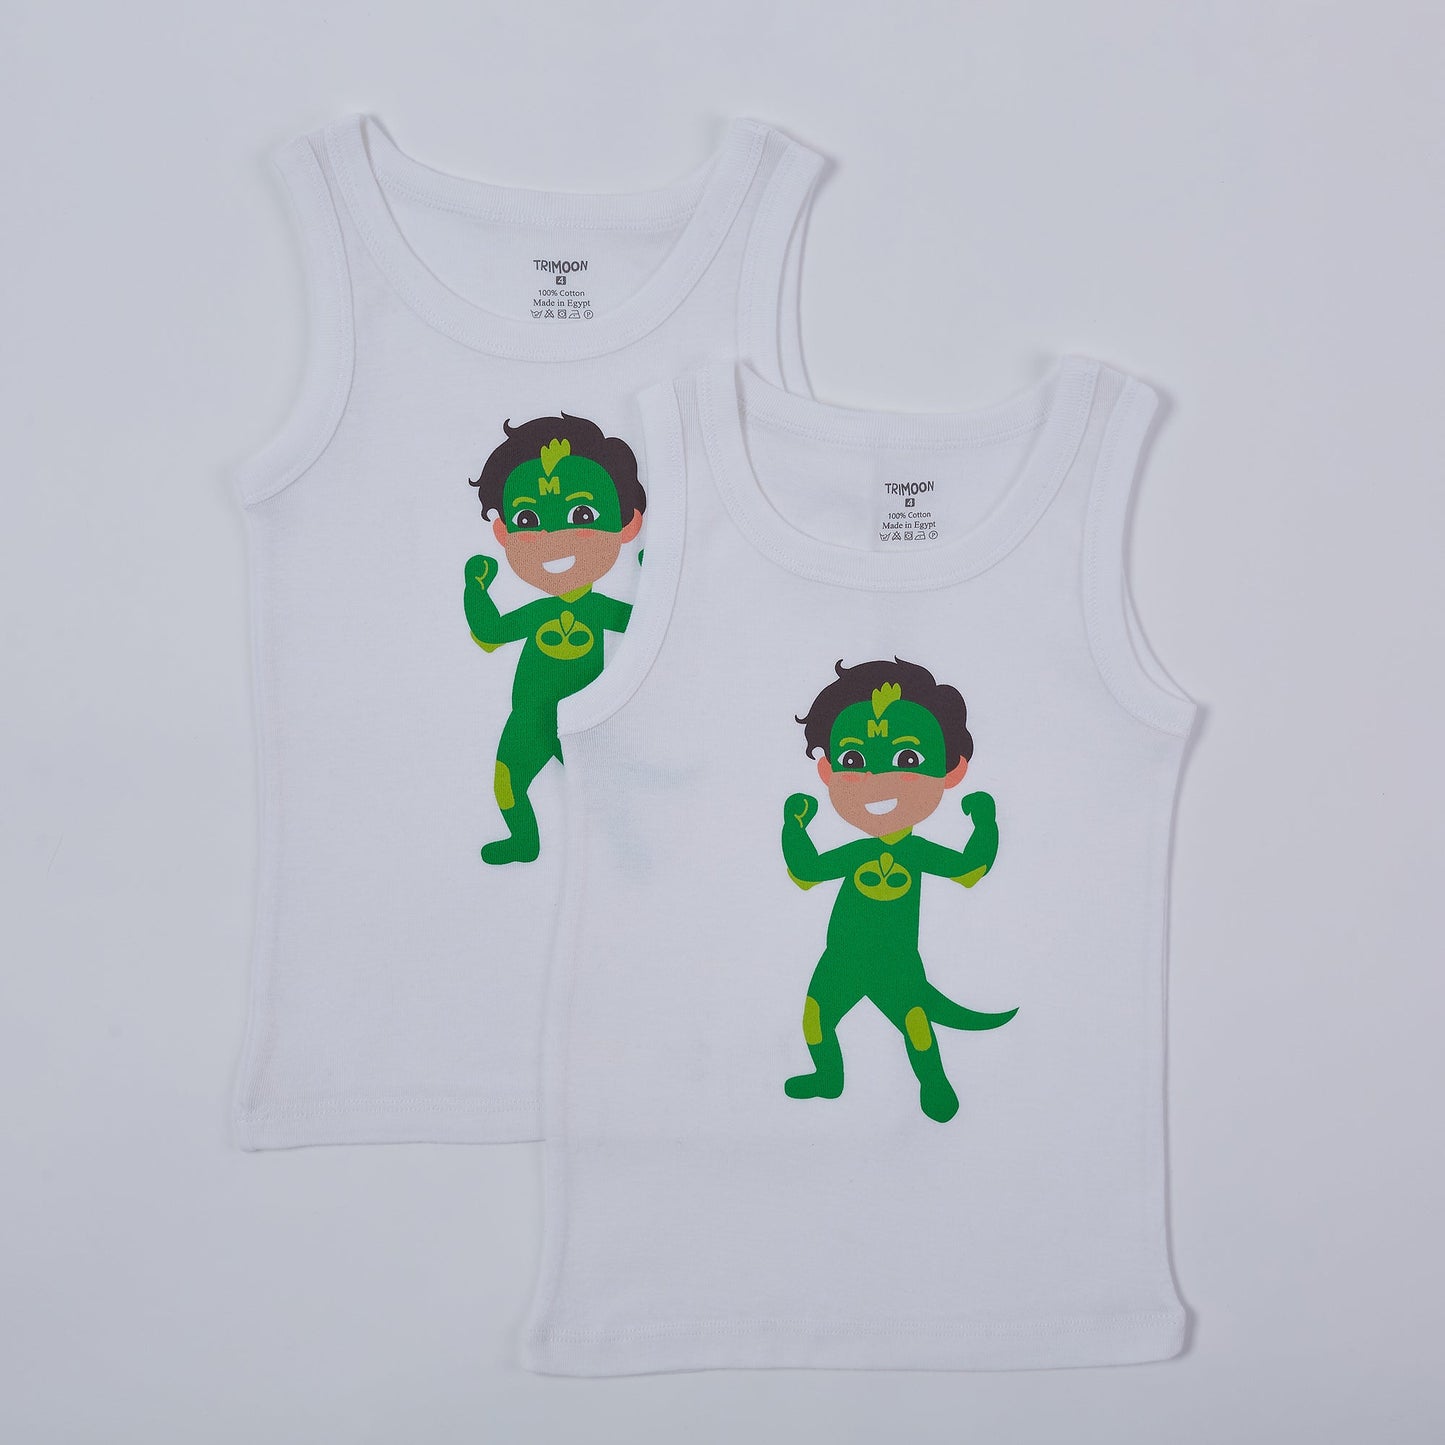 Trimoon Pack of 2 Brand New Undershirts For Boys - Howdi Moon - mymadstore.com